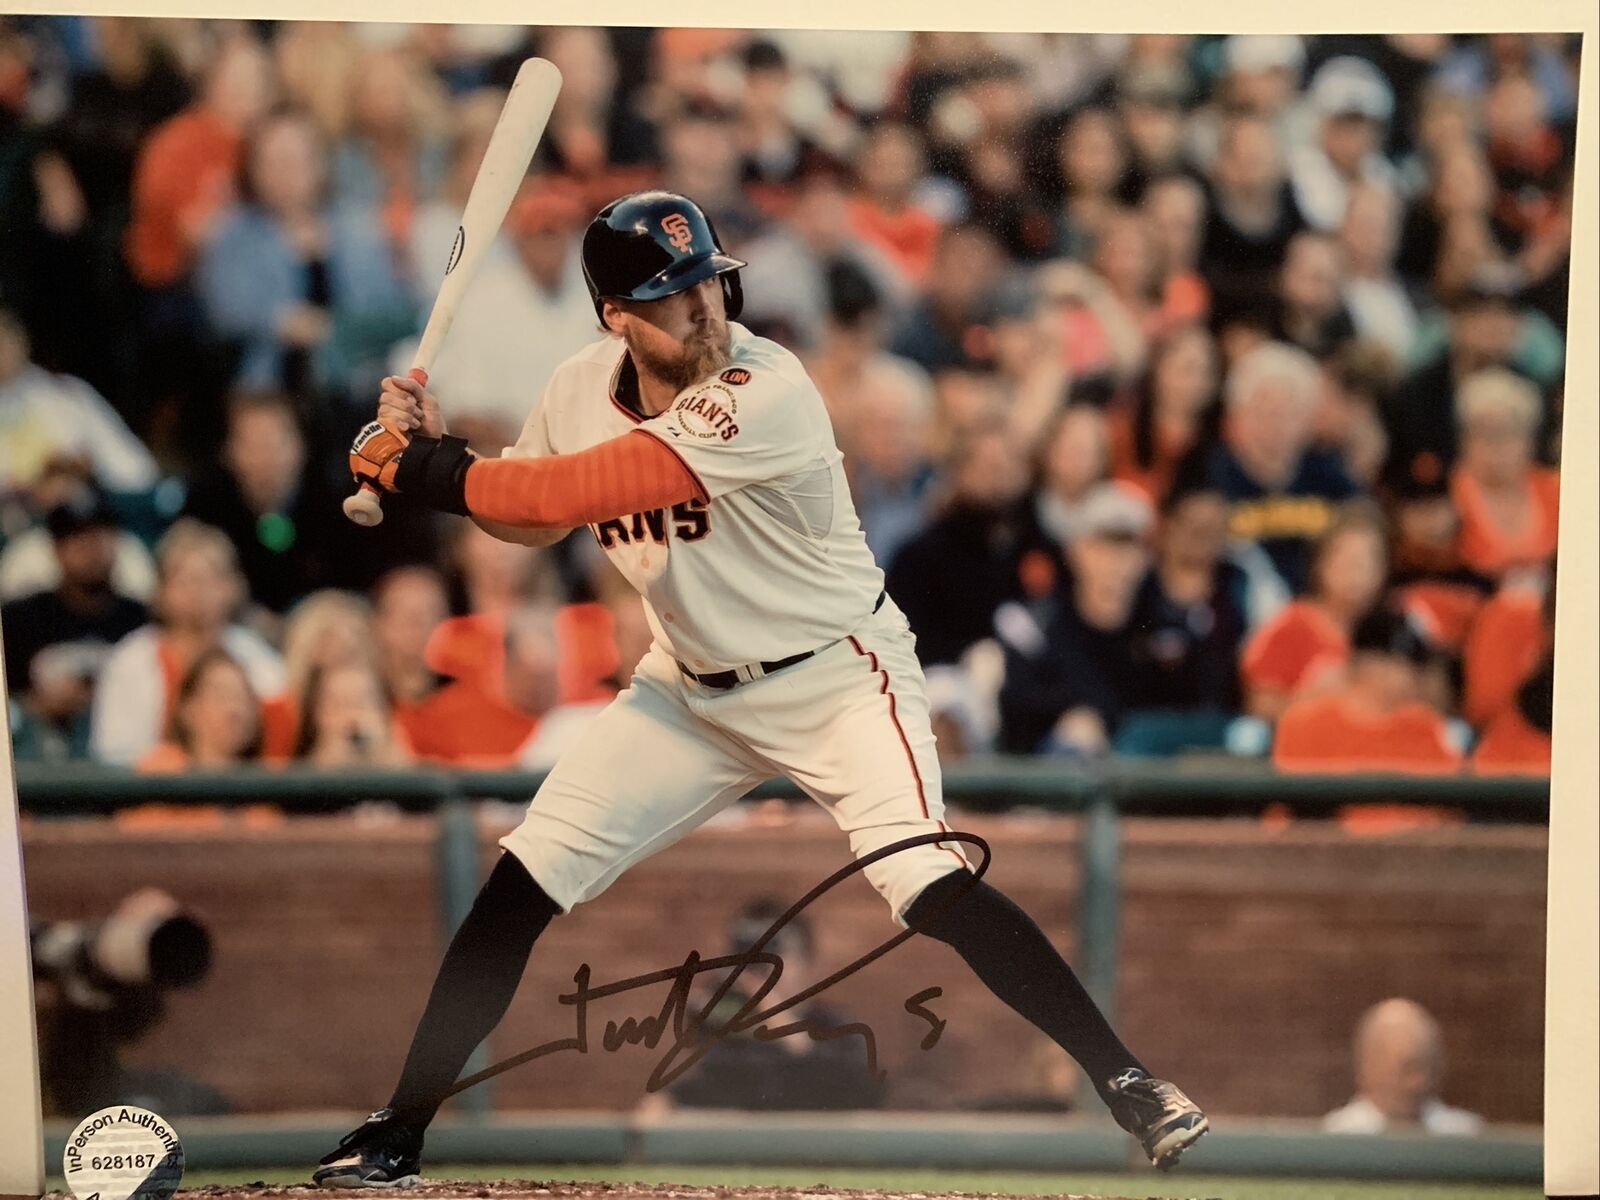 Hunter Pence Autographed Hand Signed 8x10 Photo with COA Houston Astros MLB